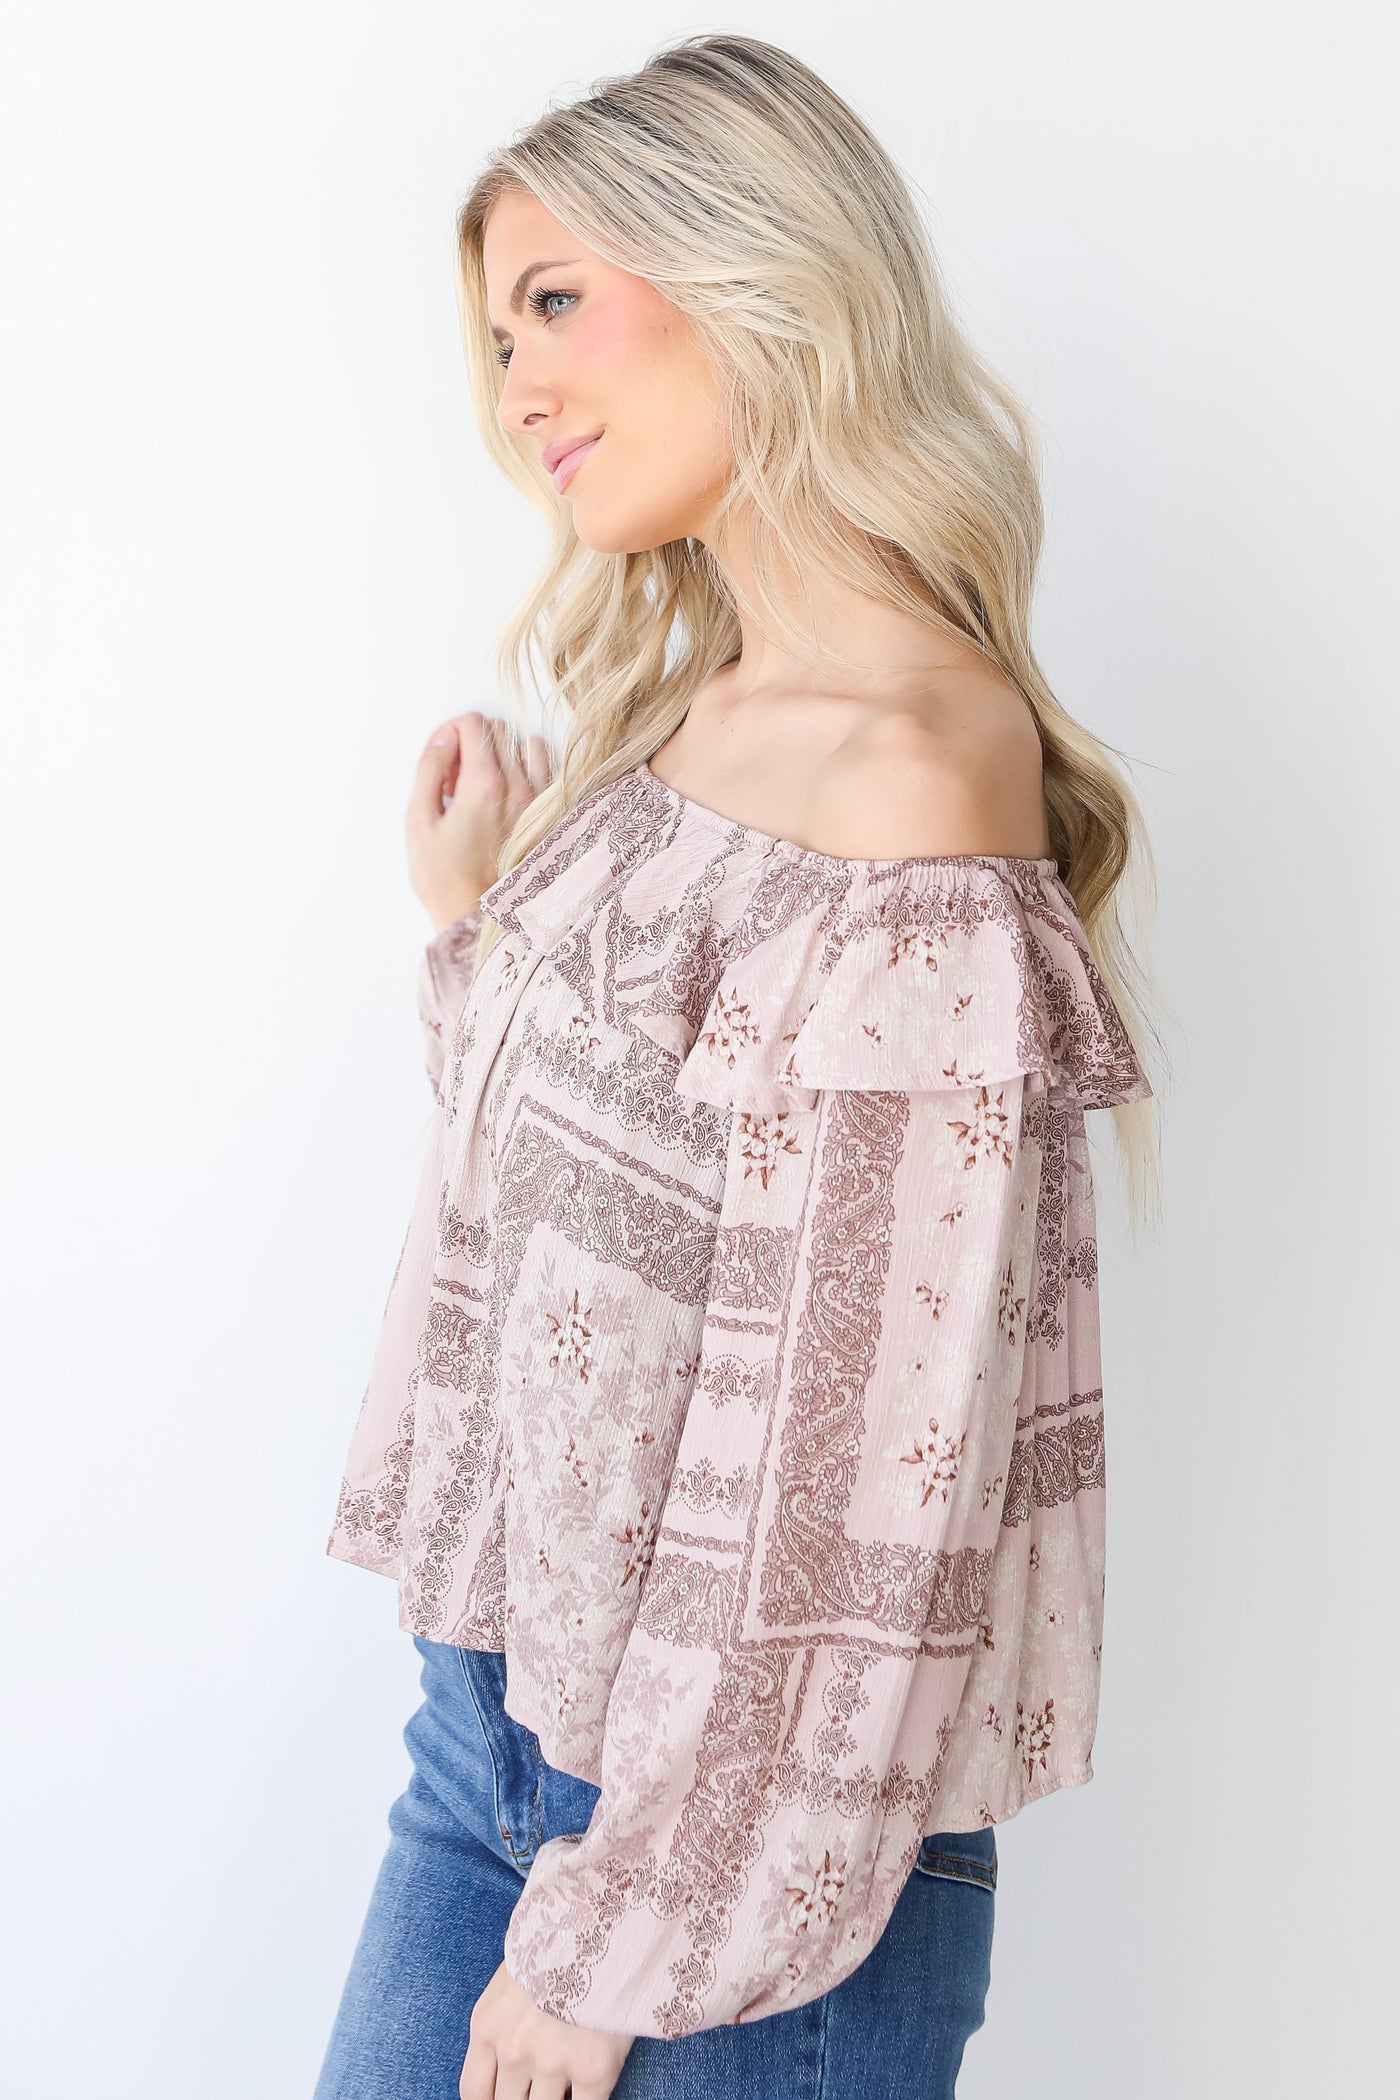 Floral Ruffle Blouse in blush side view